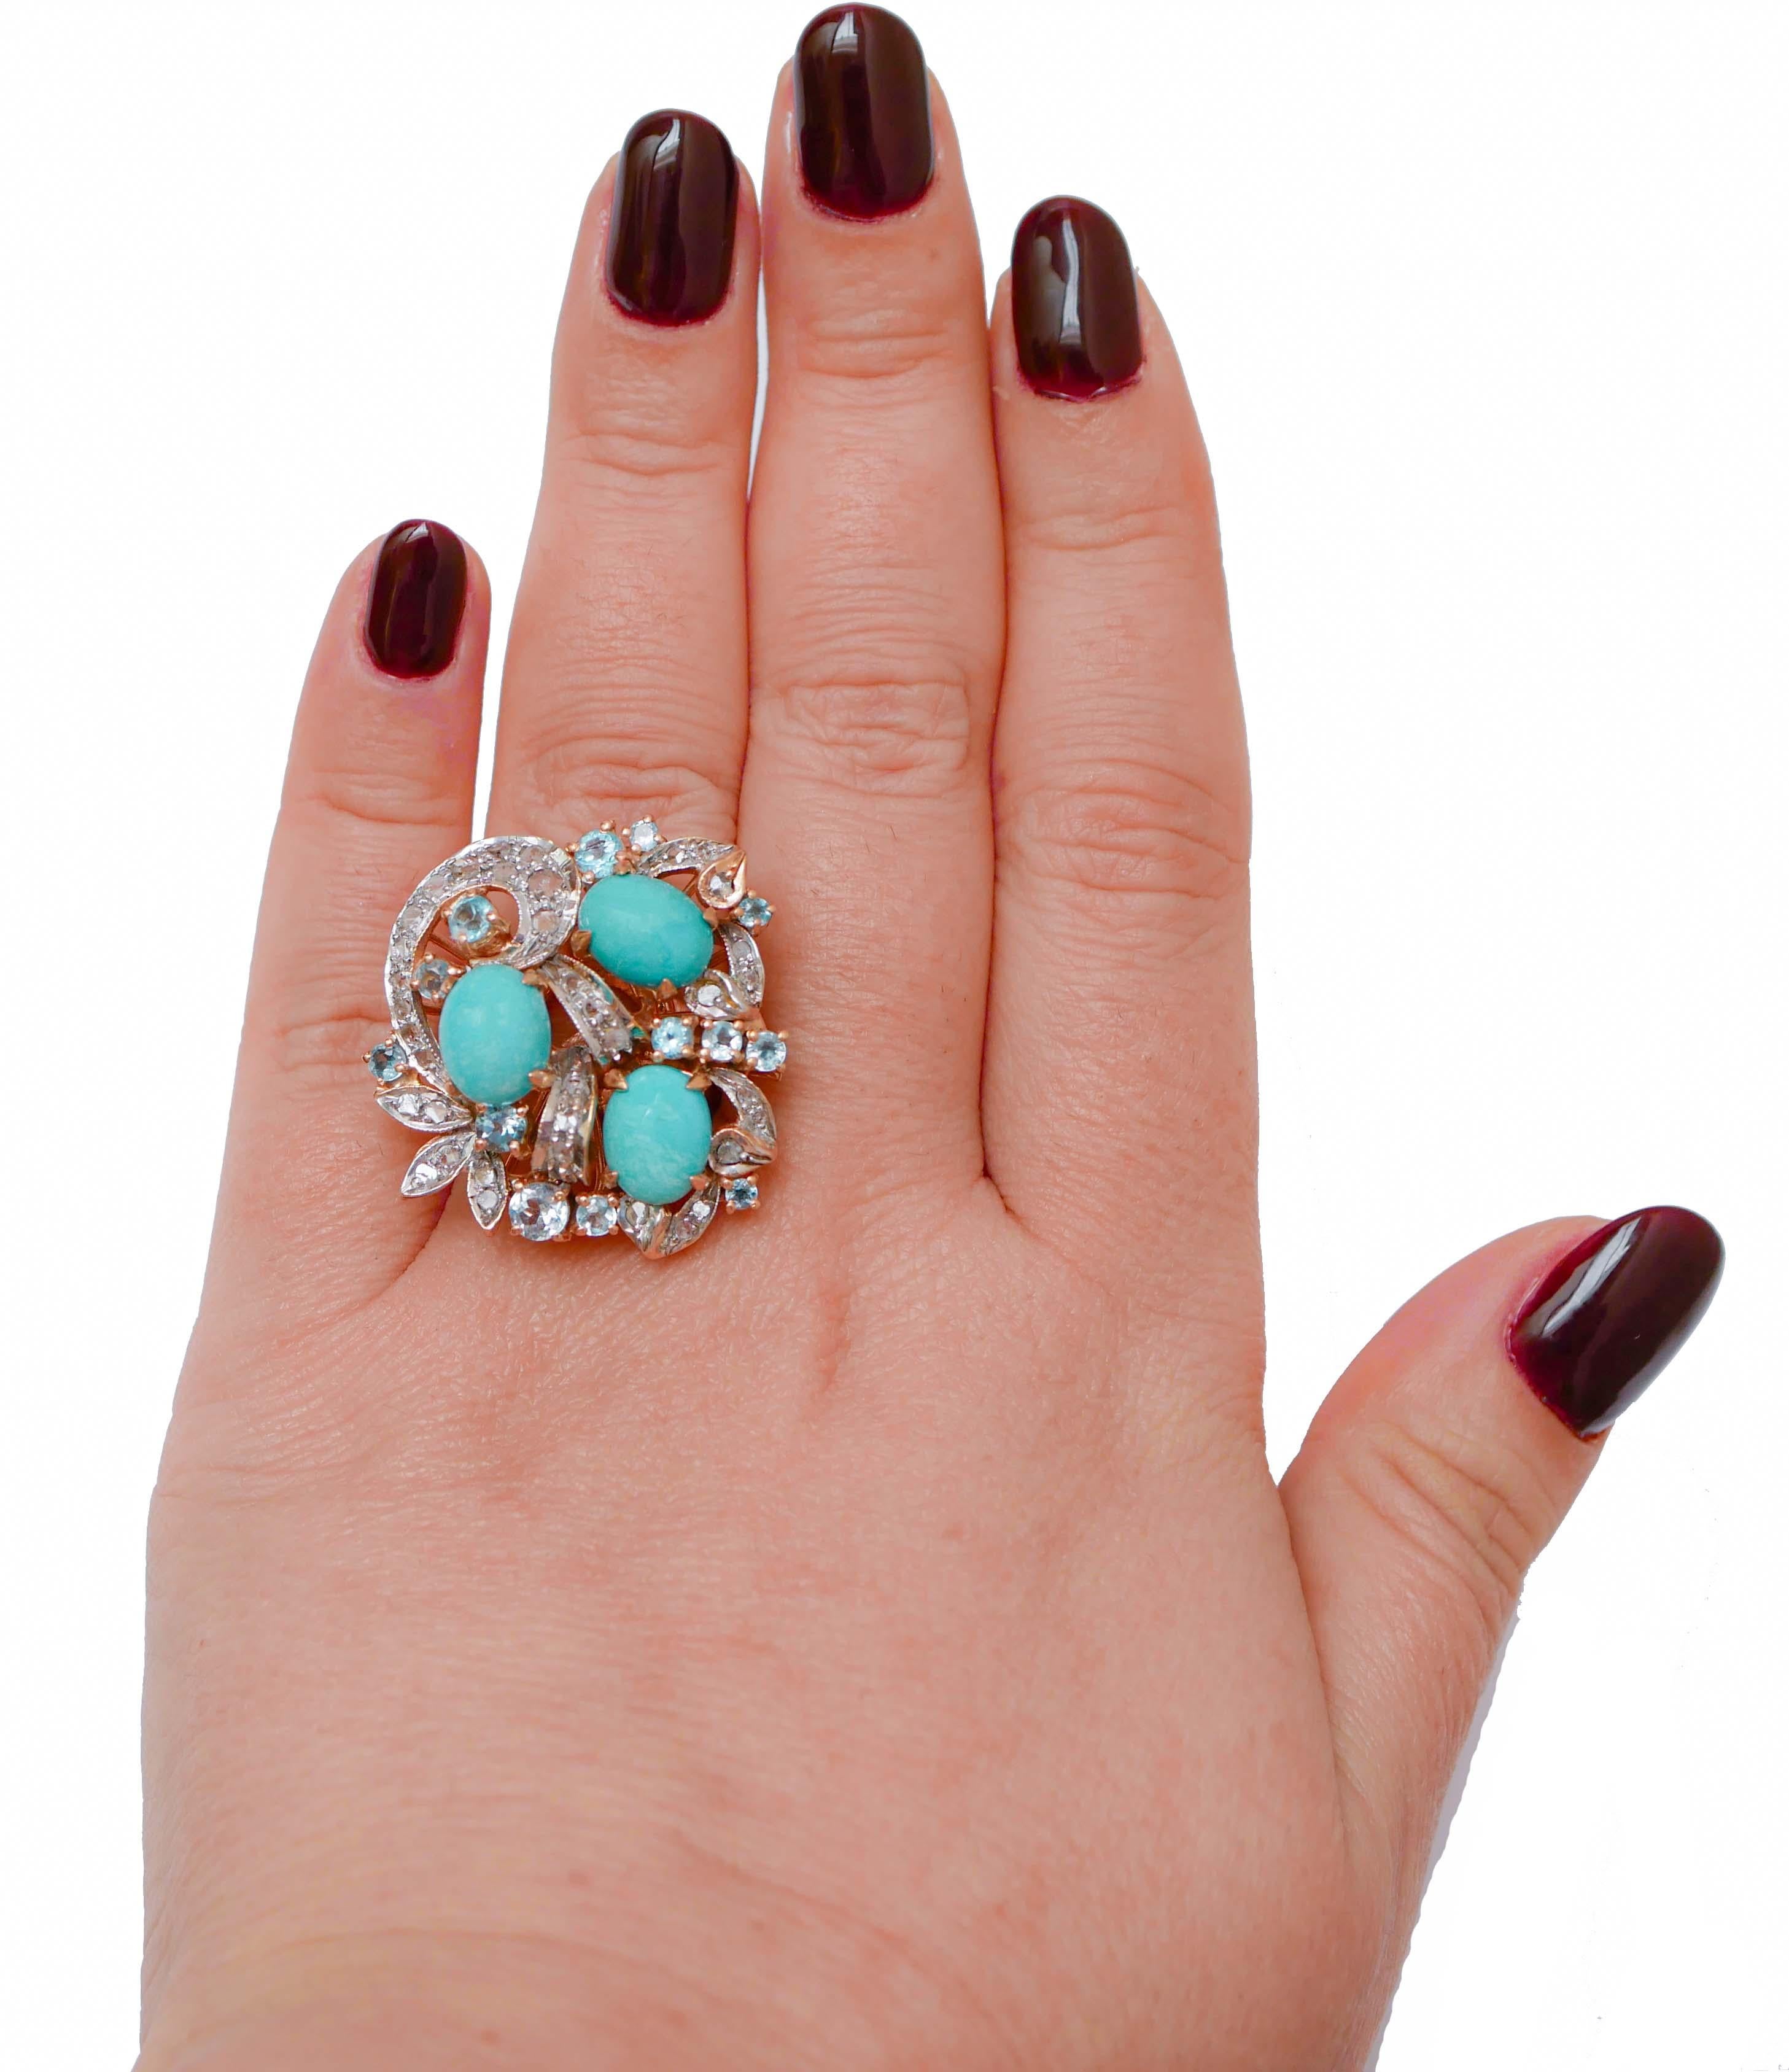 Mixed Cut Aquamarine Colour Topazs, Turquoises, Diamonds, 14 Kt Rose Gold and Silver Ring. For Sale